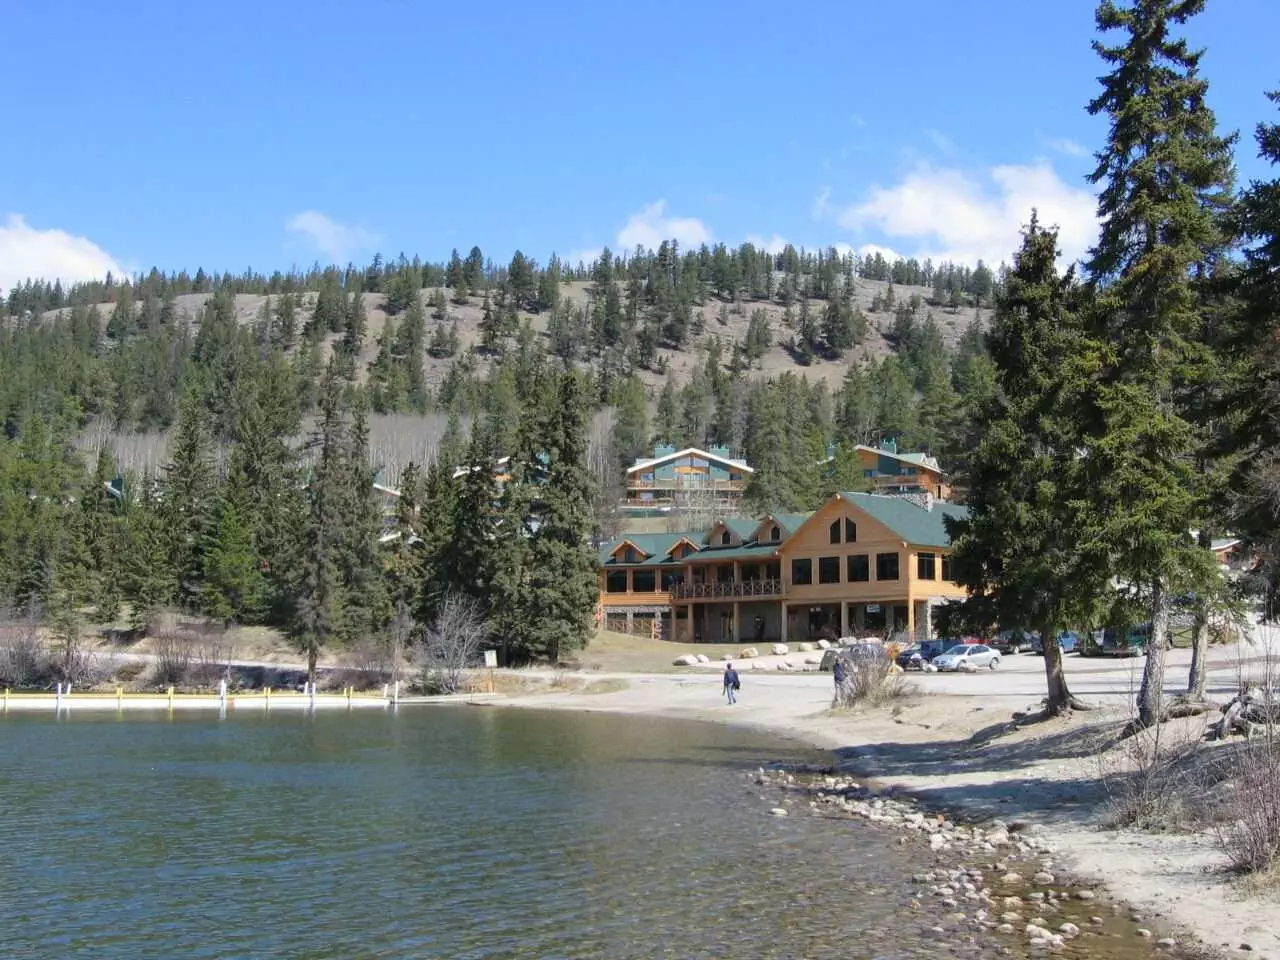 A Superb Guide To The Pyramid Lake Resort 4